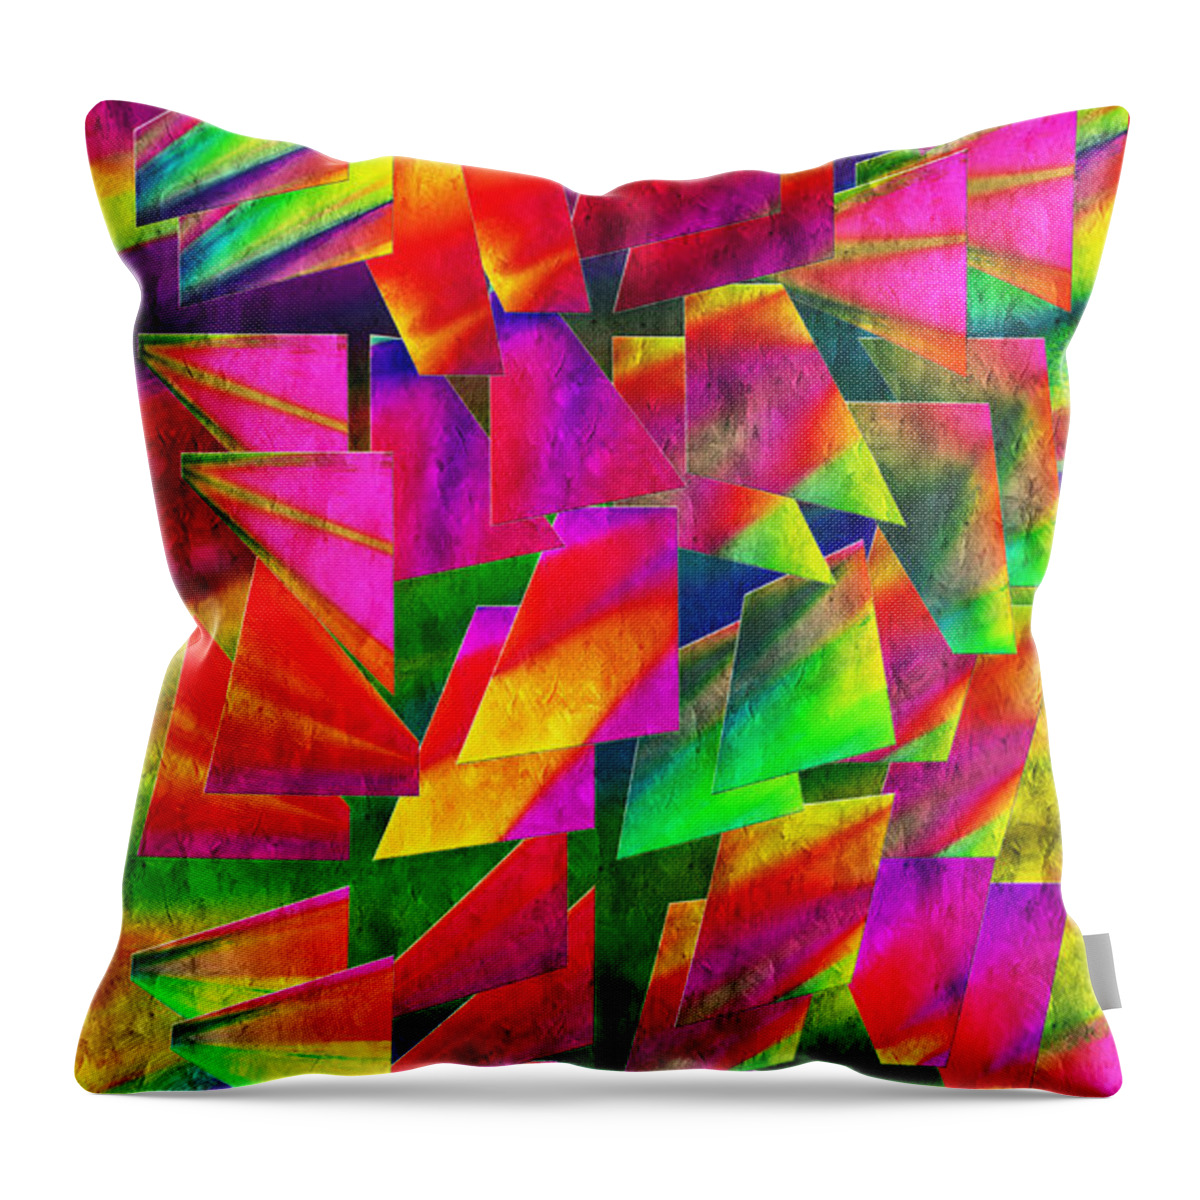 Andee Design Abstract Throw Pillow featuring the digital art Rainbow Bliss 2 - Twisted - Painterly V by Andee Design